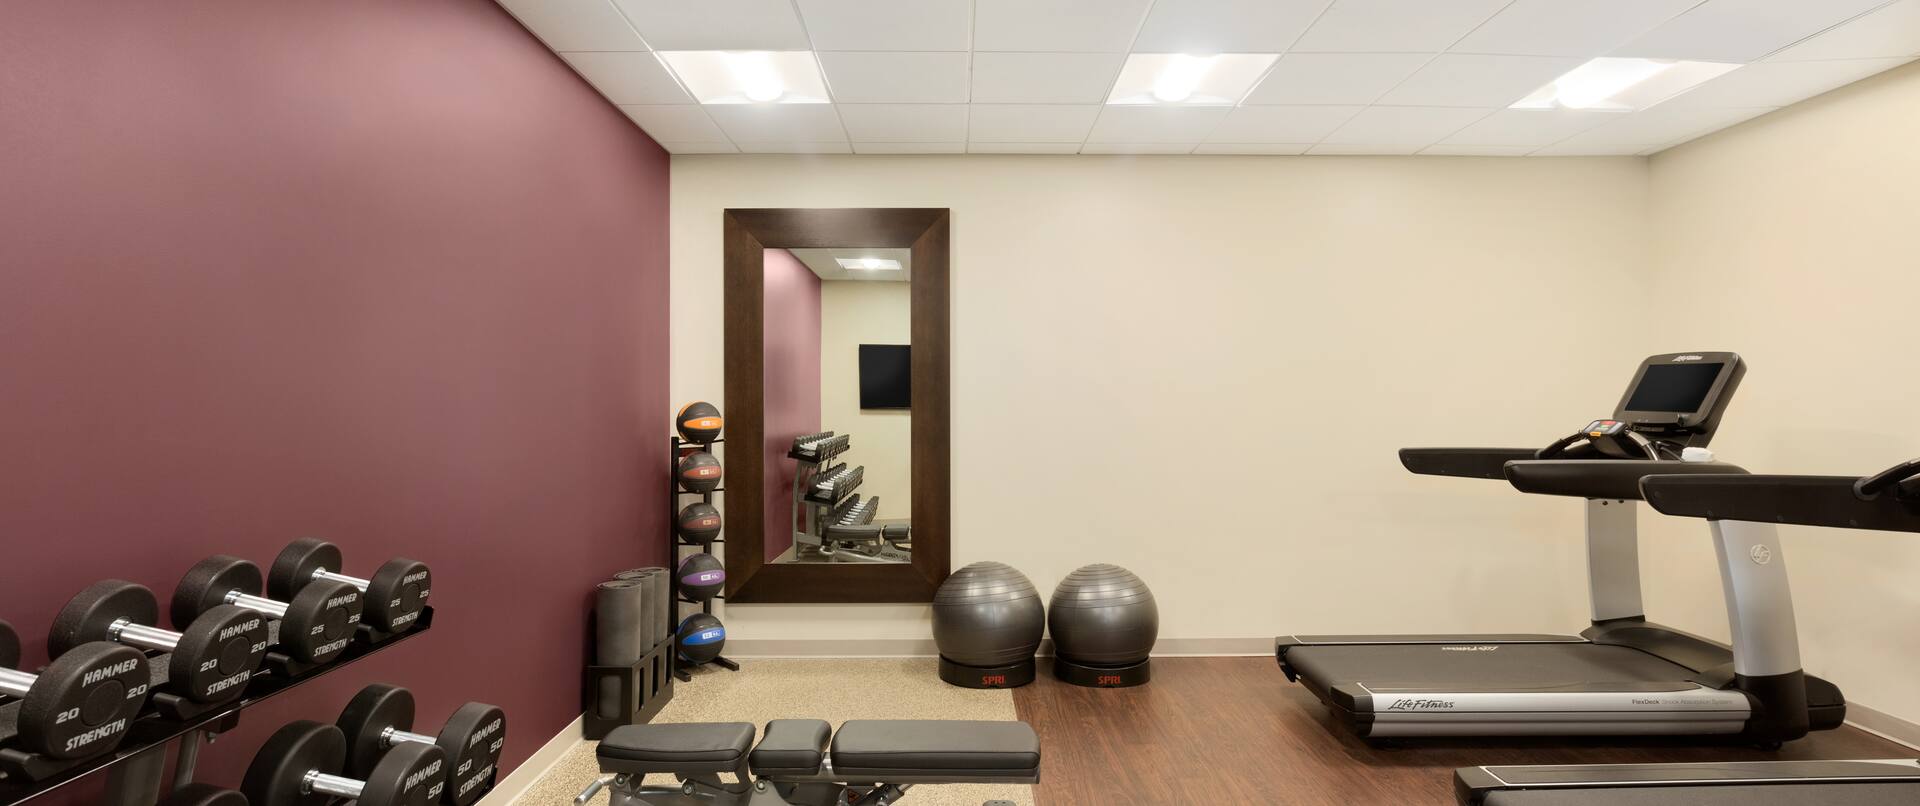 Fitness Center with Treadmills, Weight Bench, Gym Balls and Dumbbell Rack